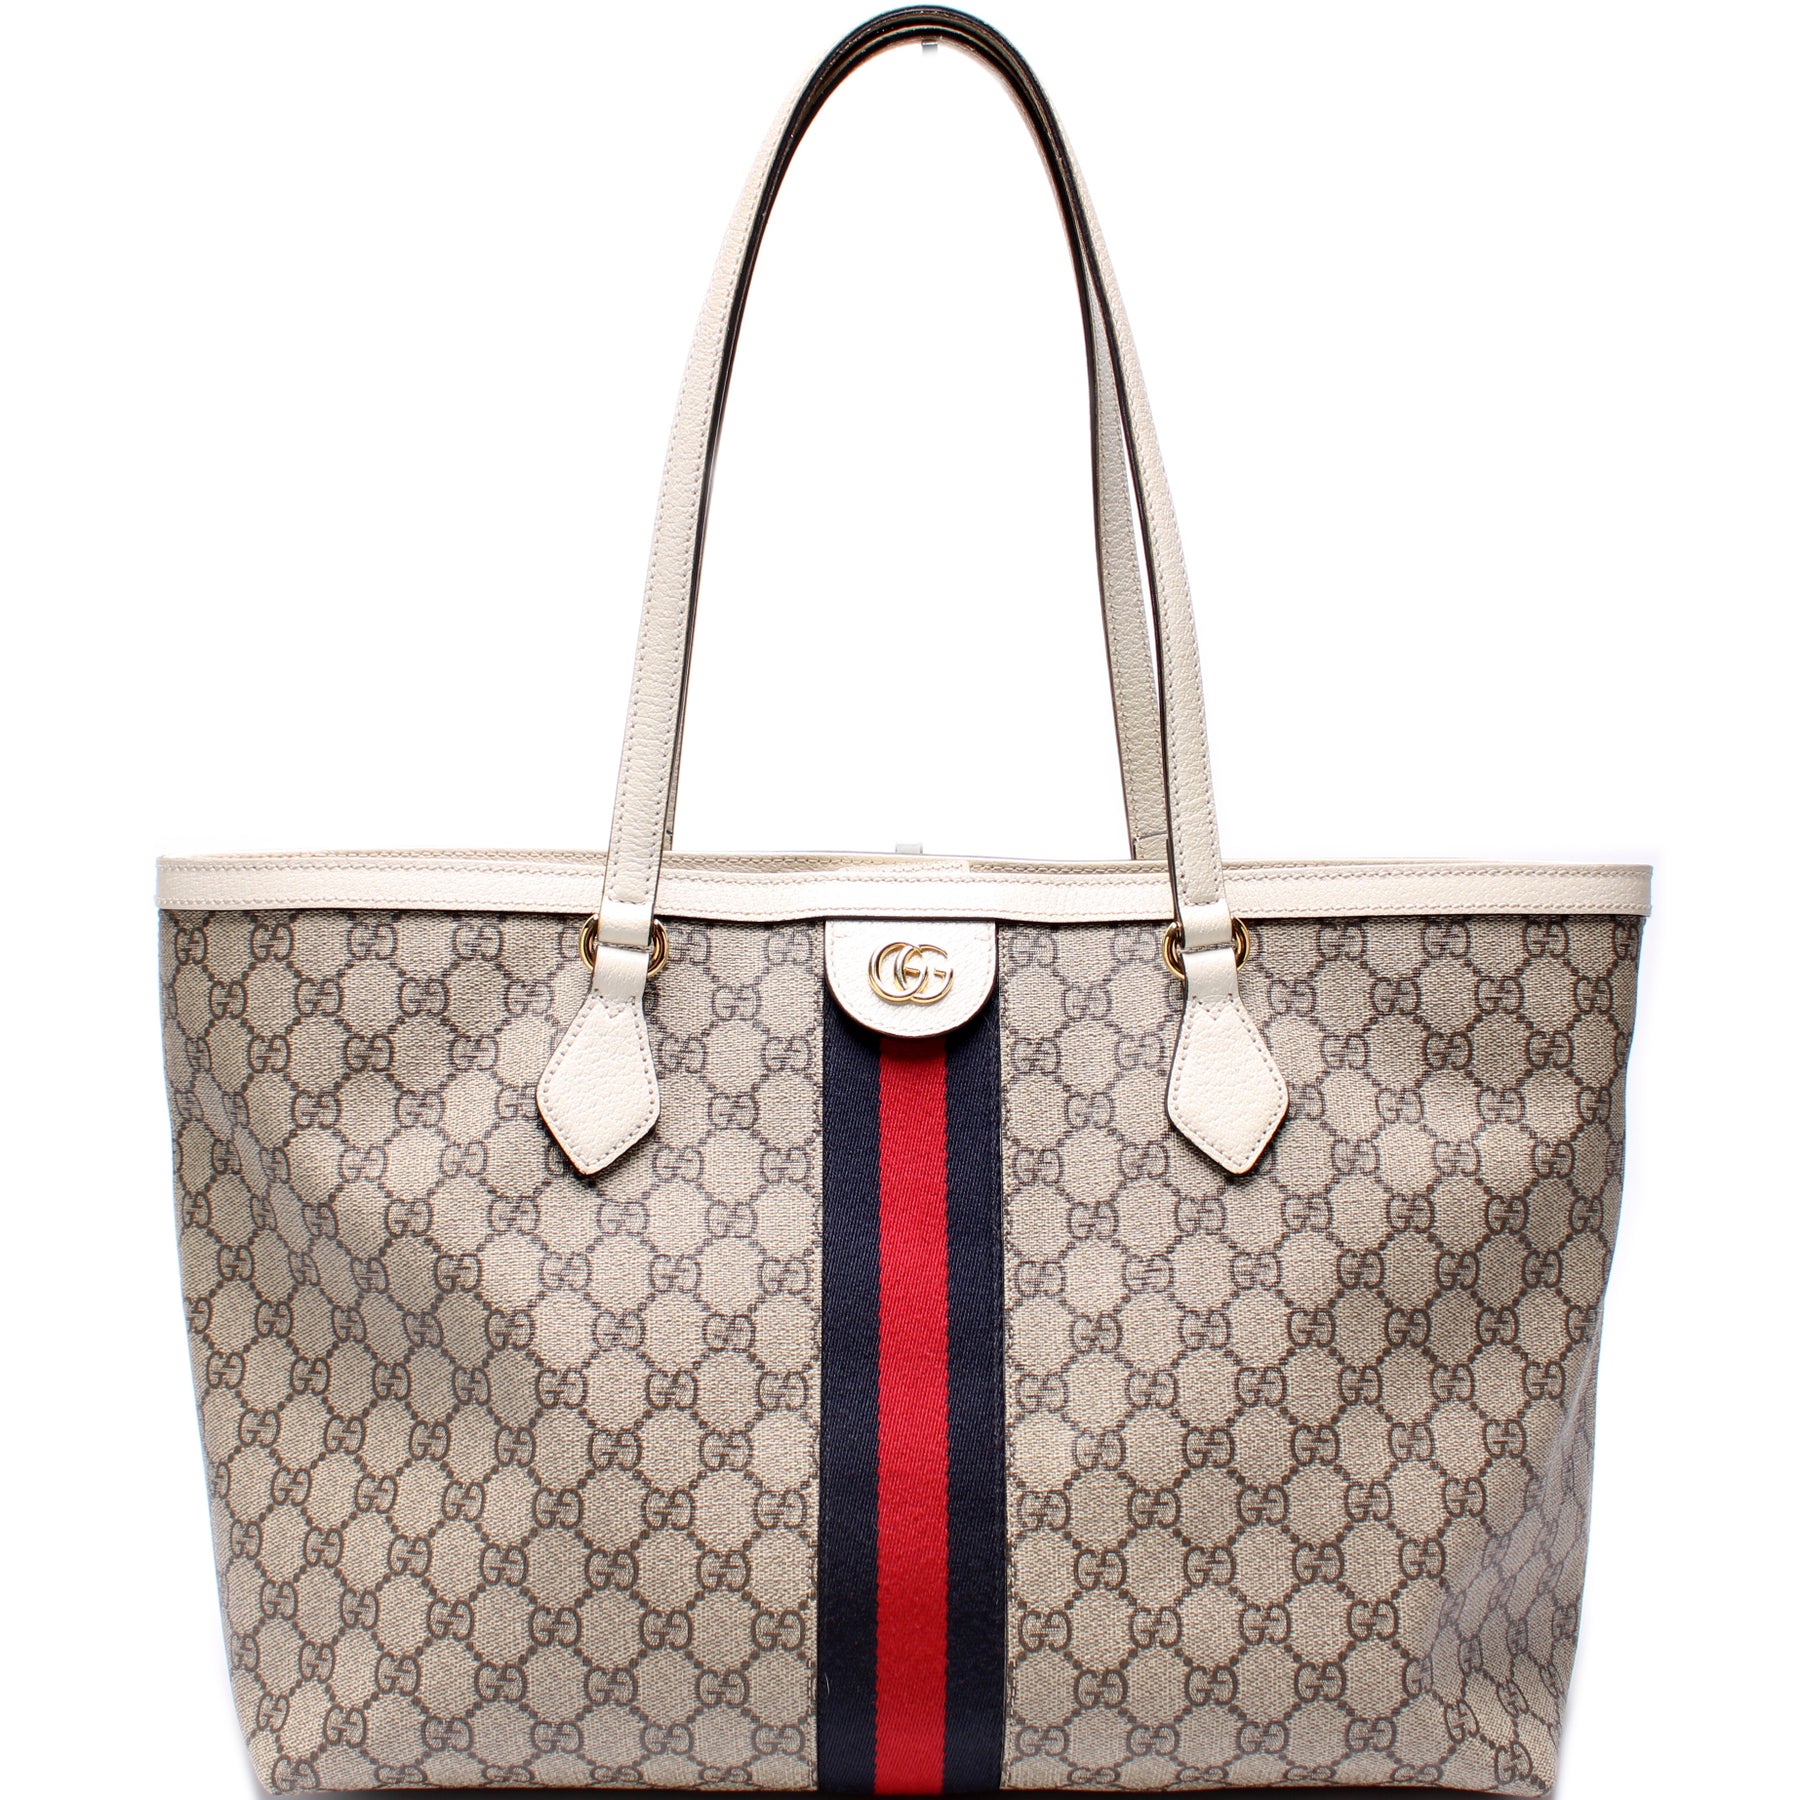 Gorgeous Authentic Gucci GG Supreme Ophidia Medium Tote Bag